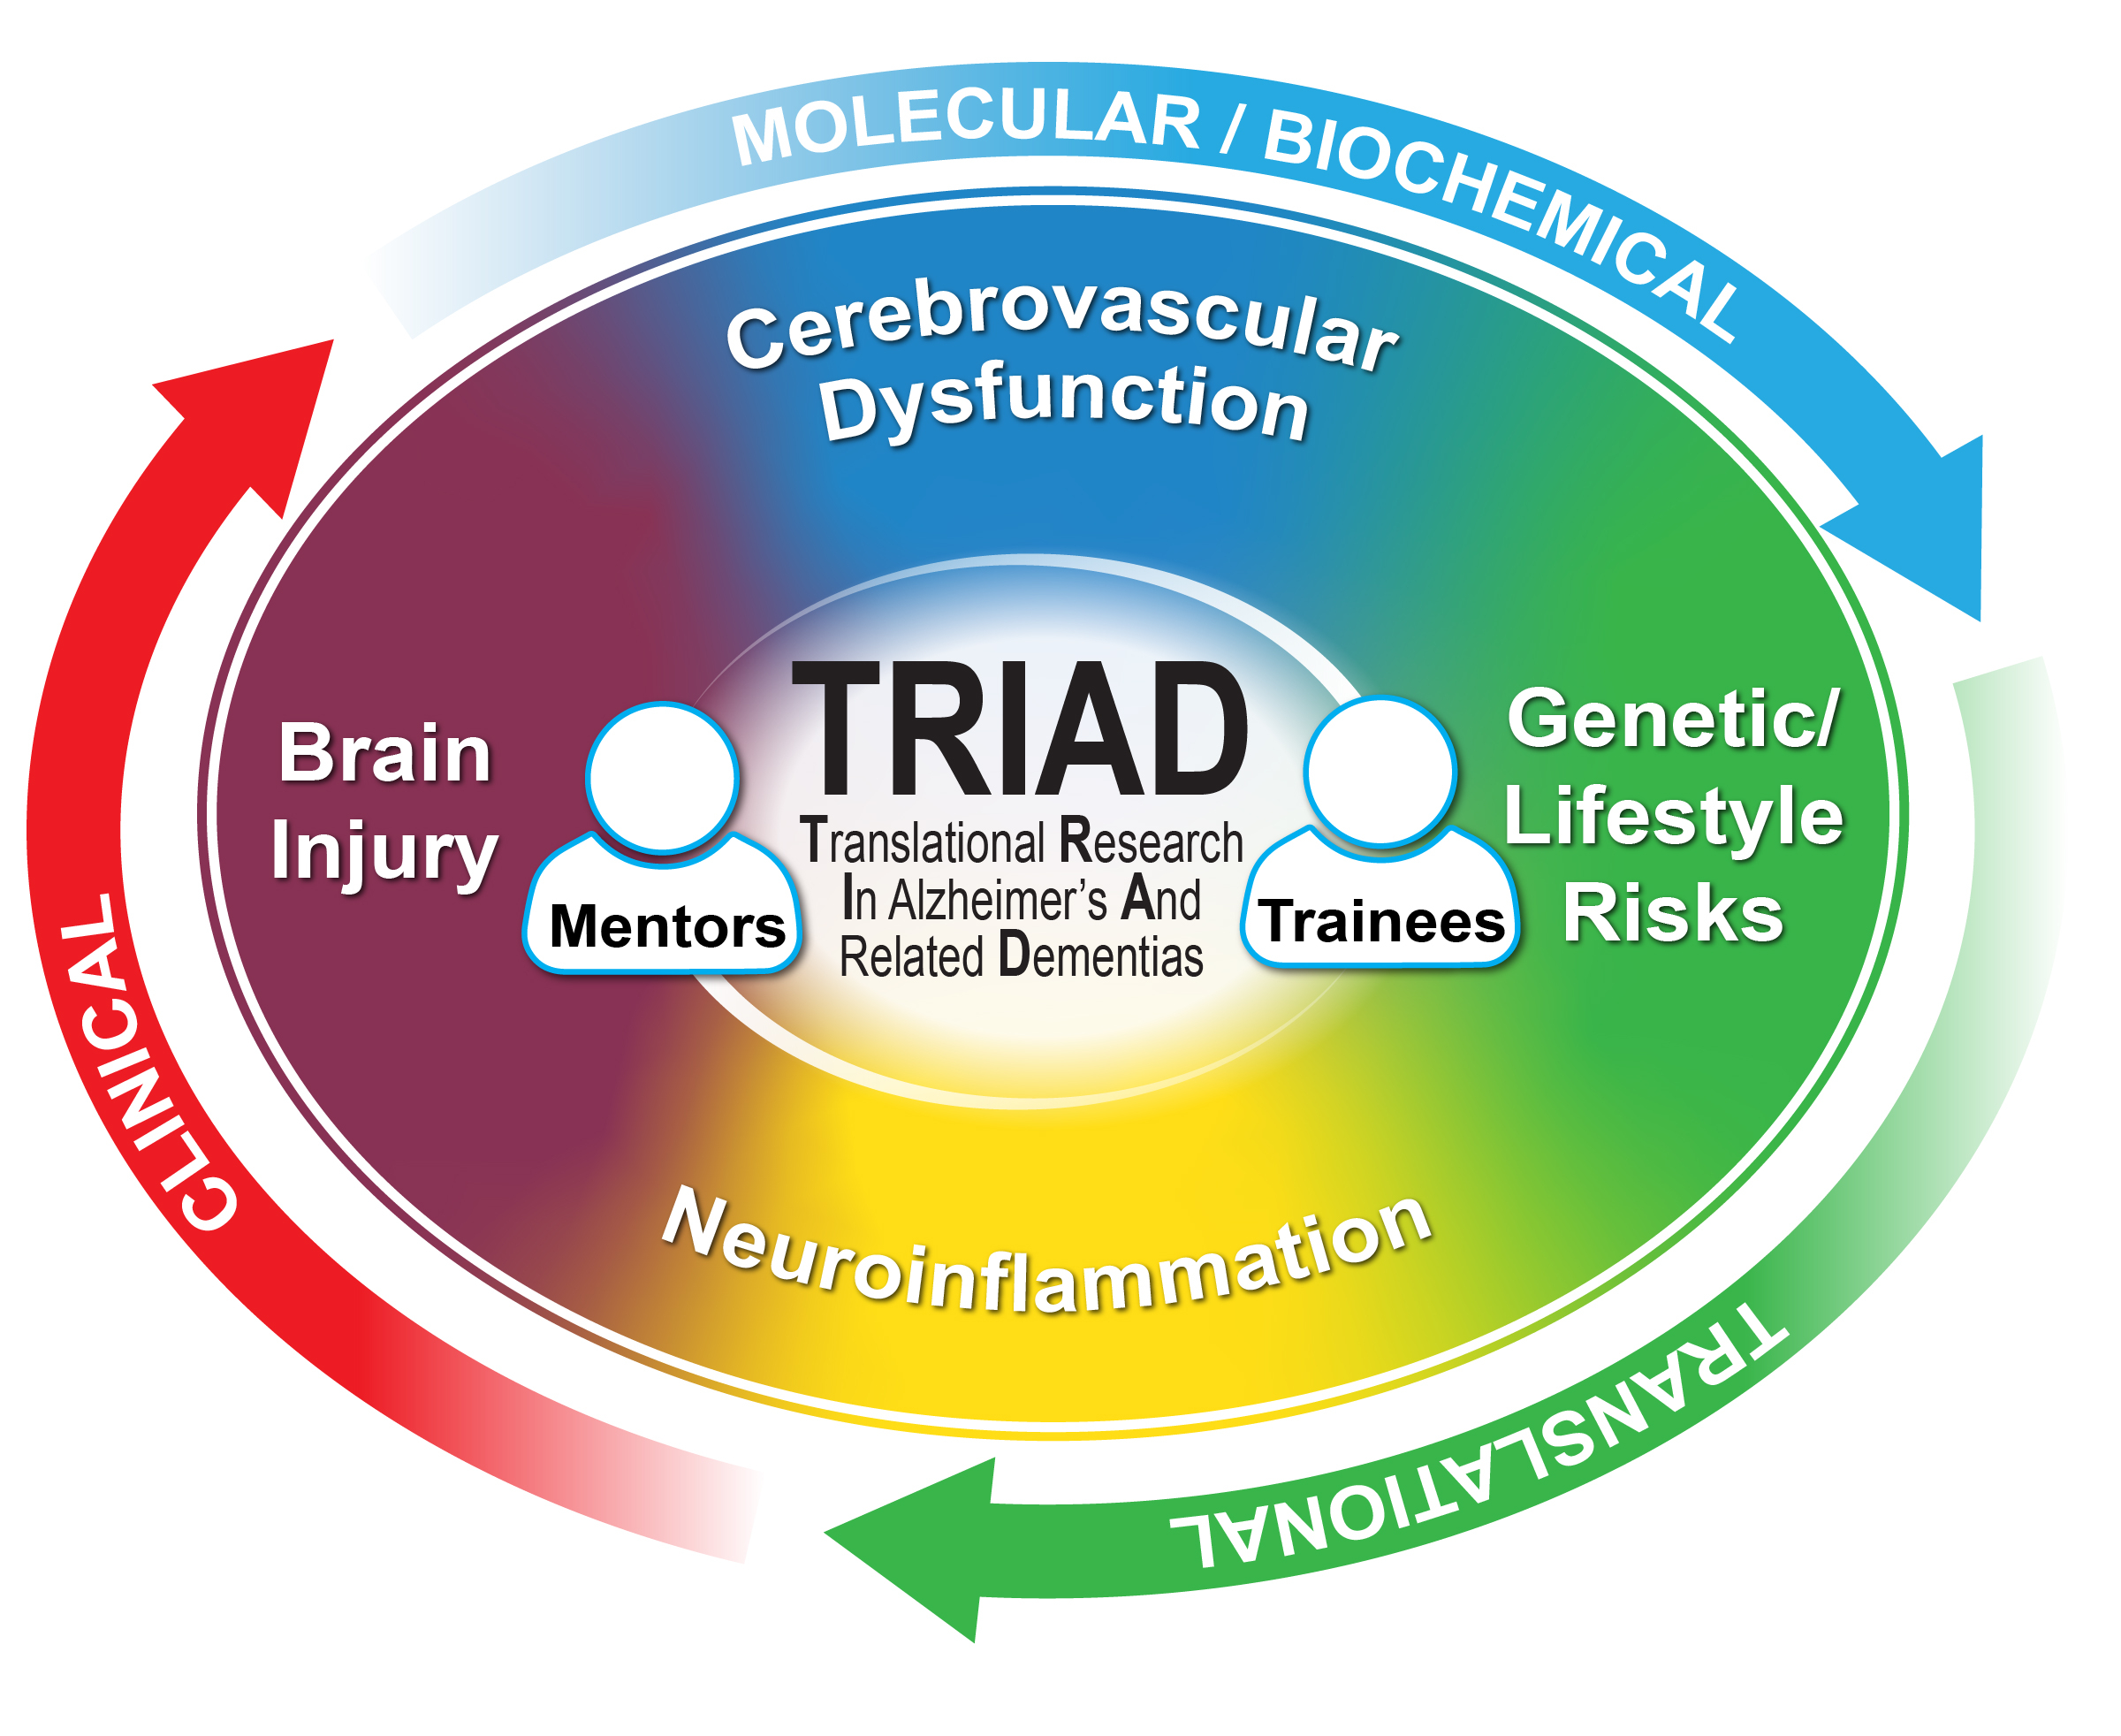 TRIAD: Translational Research in Alzheimers and Related Dementias. Mentors and Trainees studying Brain Injury, Cerebrovascular Dysfunction, Genetic/Lifestyle Risks, Neuroinflammation through Clinical, Molecular/Biochemical, and Translational Science